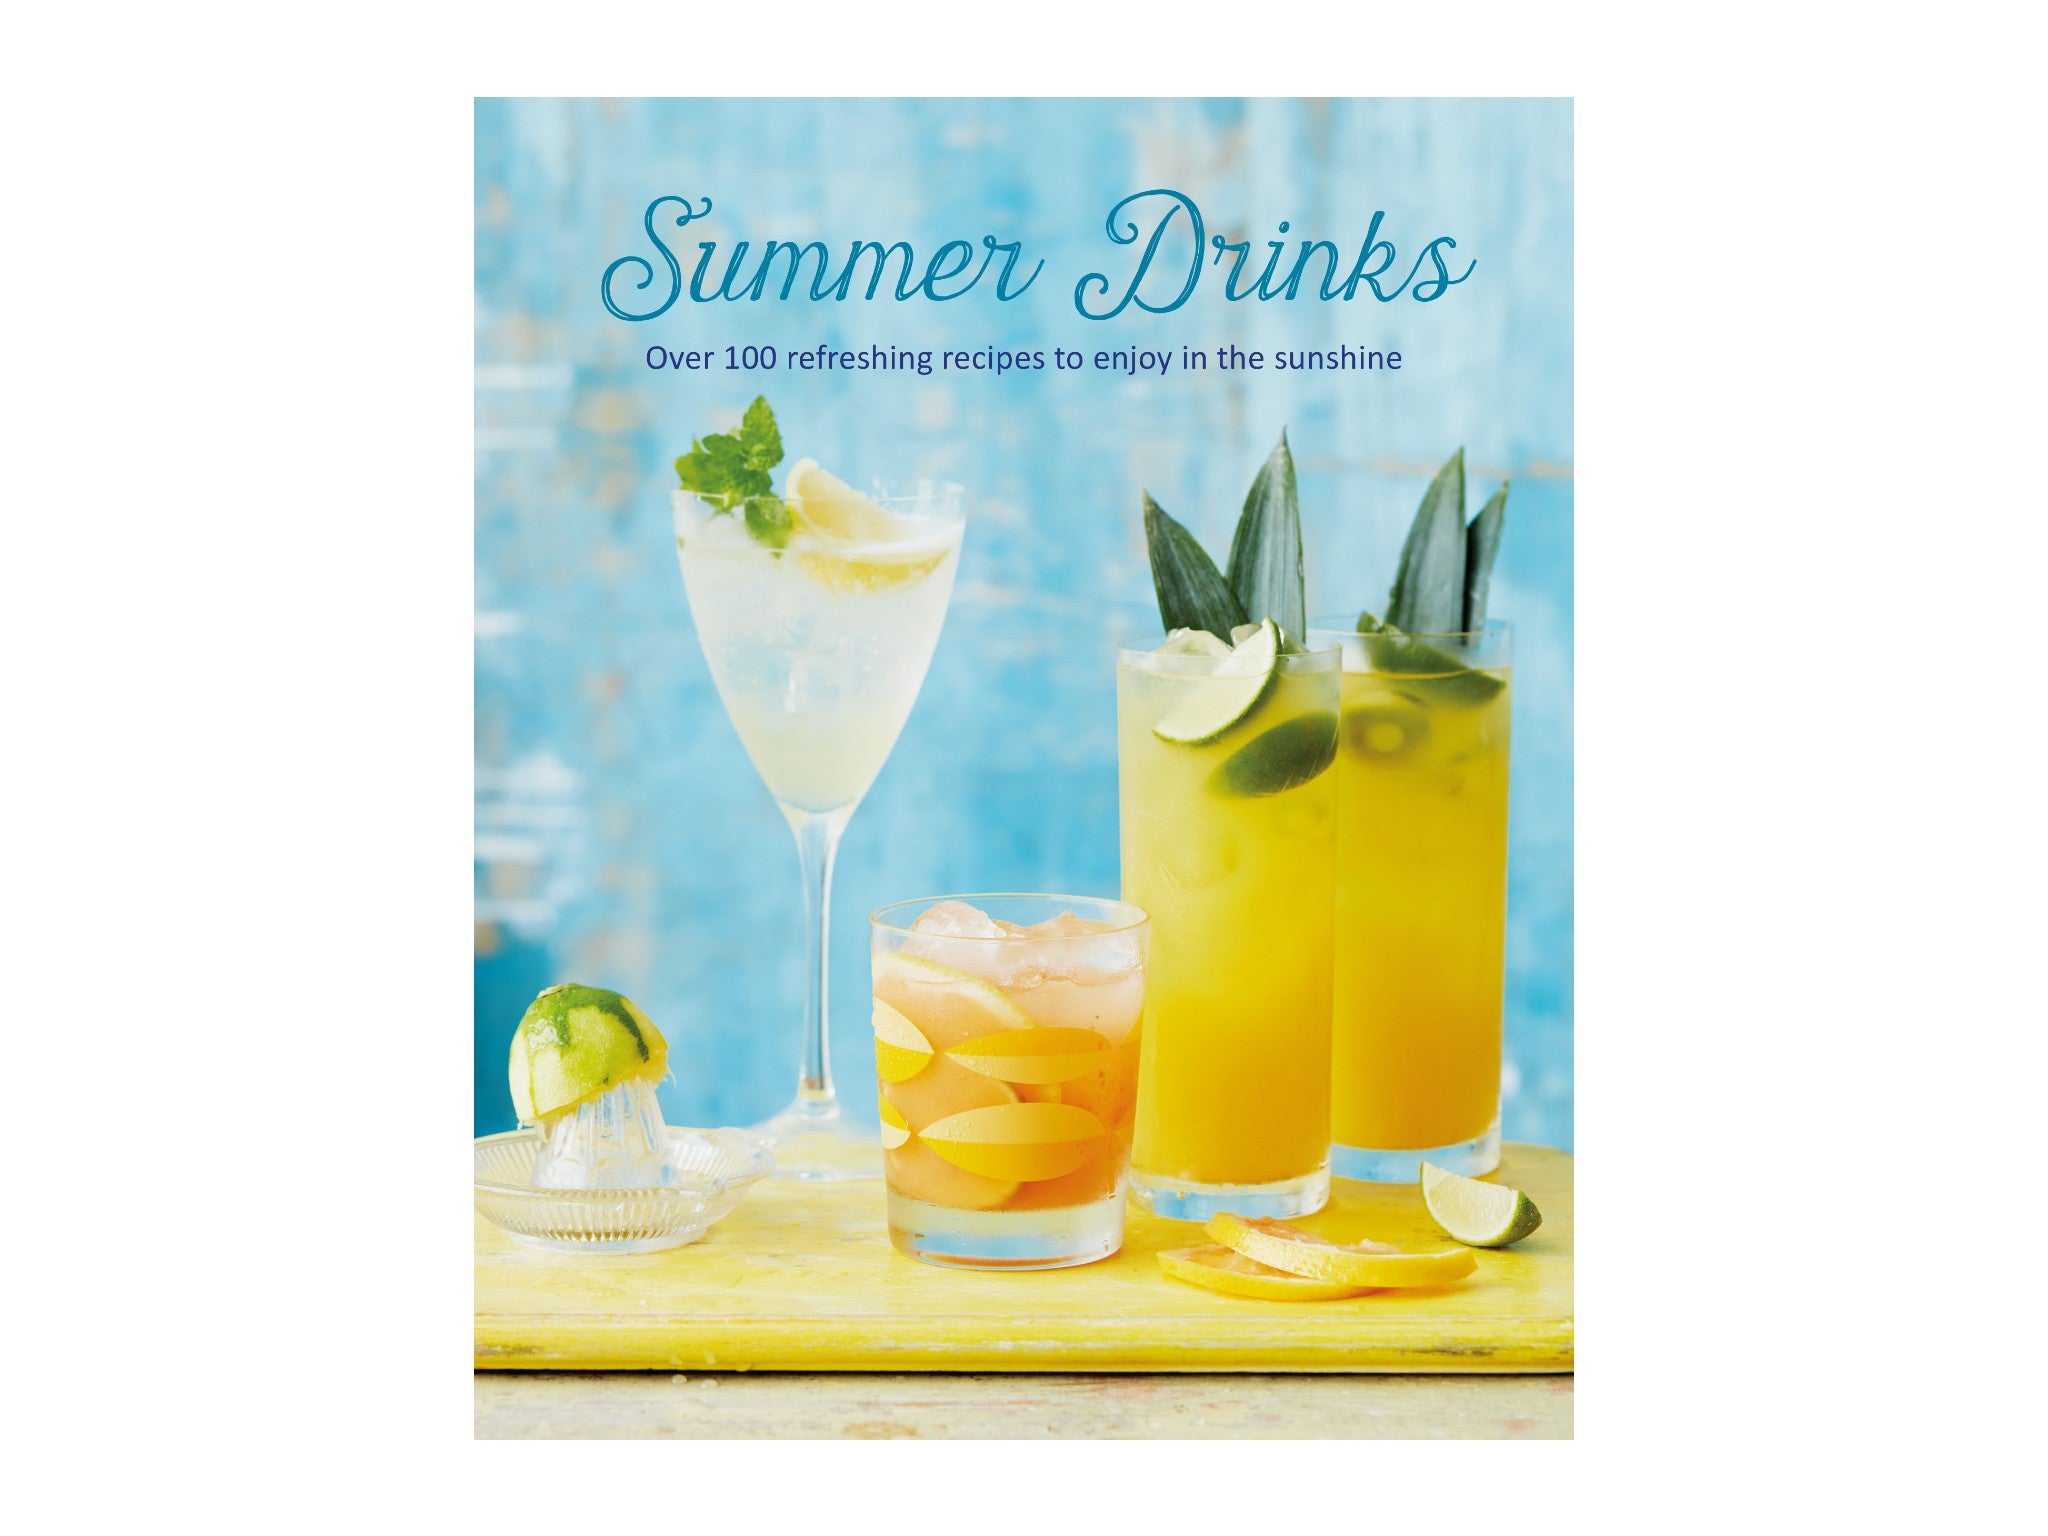 ‘Summer Drinks’, published by Ryland, Peters & Small Ltd indybest.jpeg